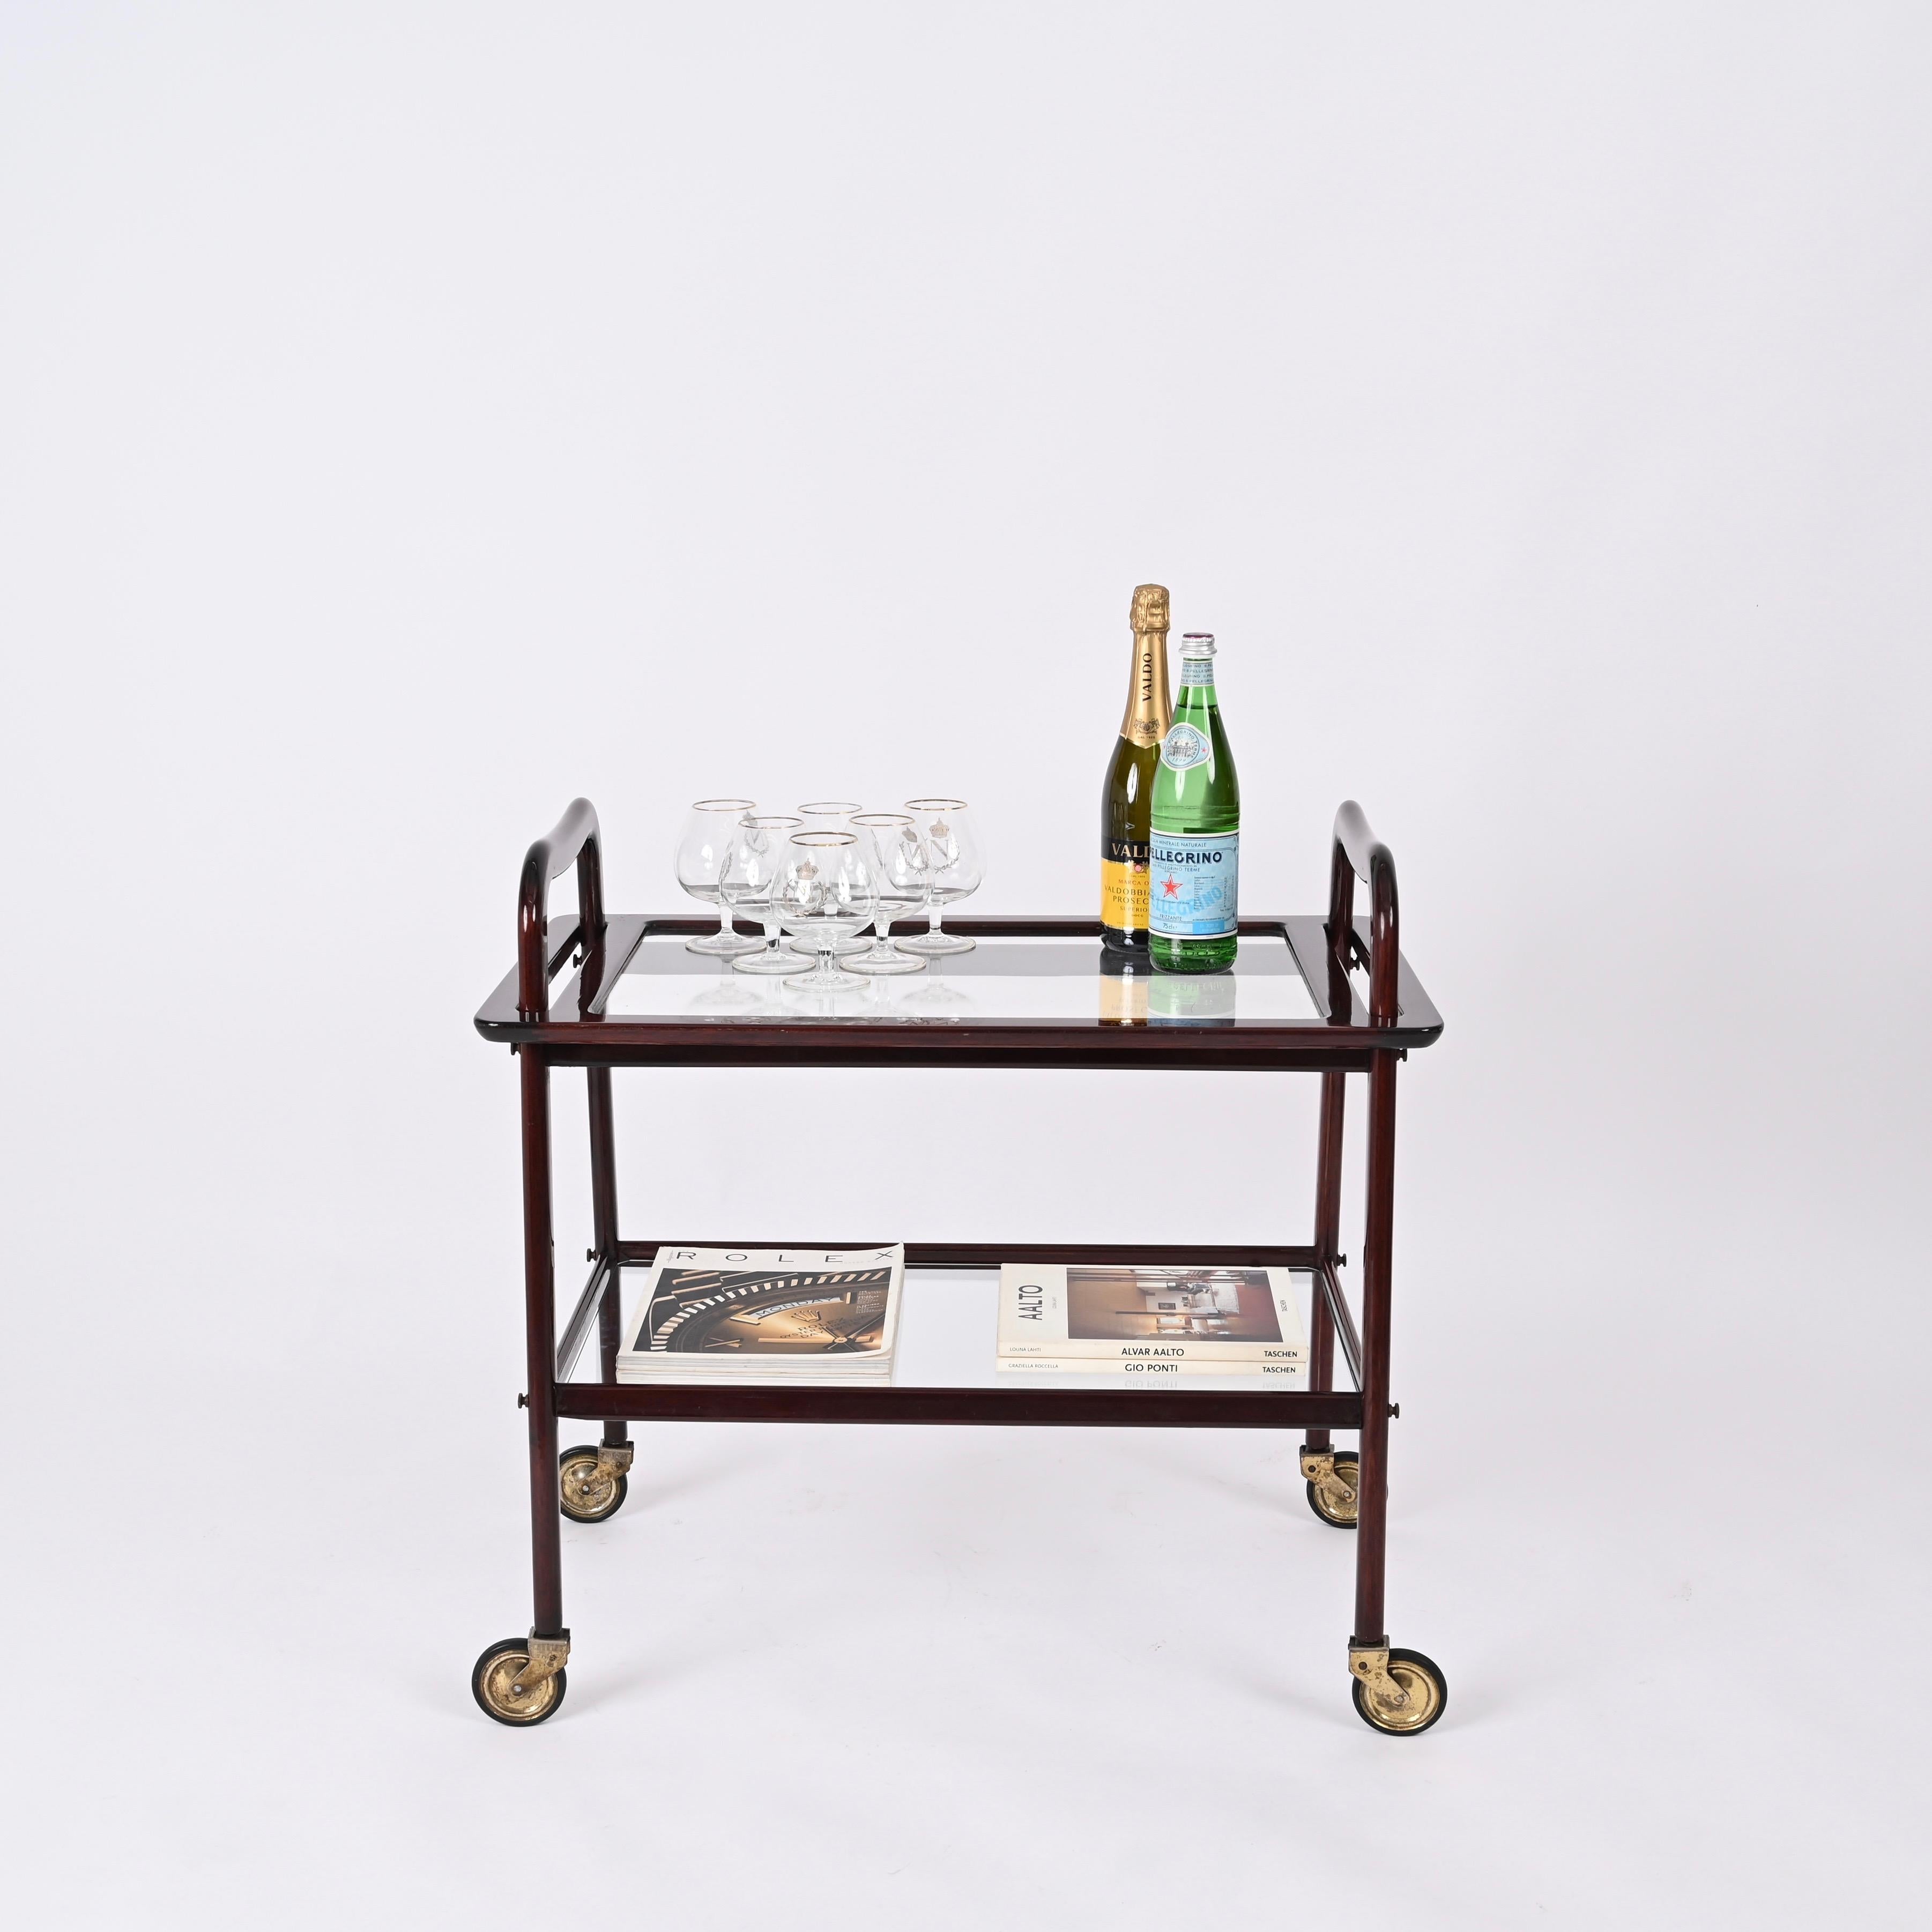 Wonderful service bar trolley designed by the master of Italian design Ico Parisi together with his wife Luisa. The cart was produced by De Baggis in the 1950s in Italy.

The wood quality of this elegant bar cart is exceptional and the sinuous lines